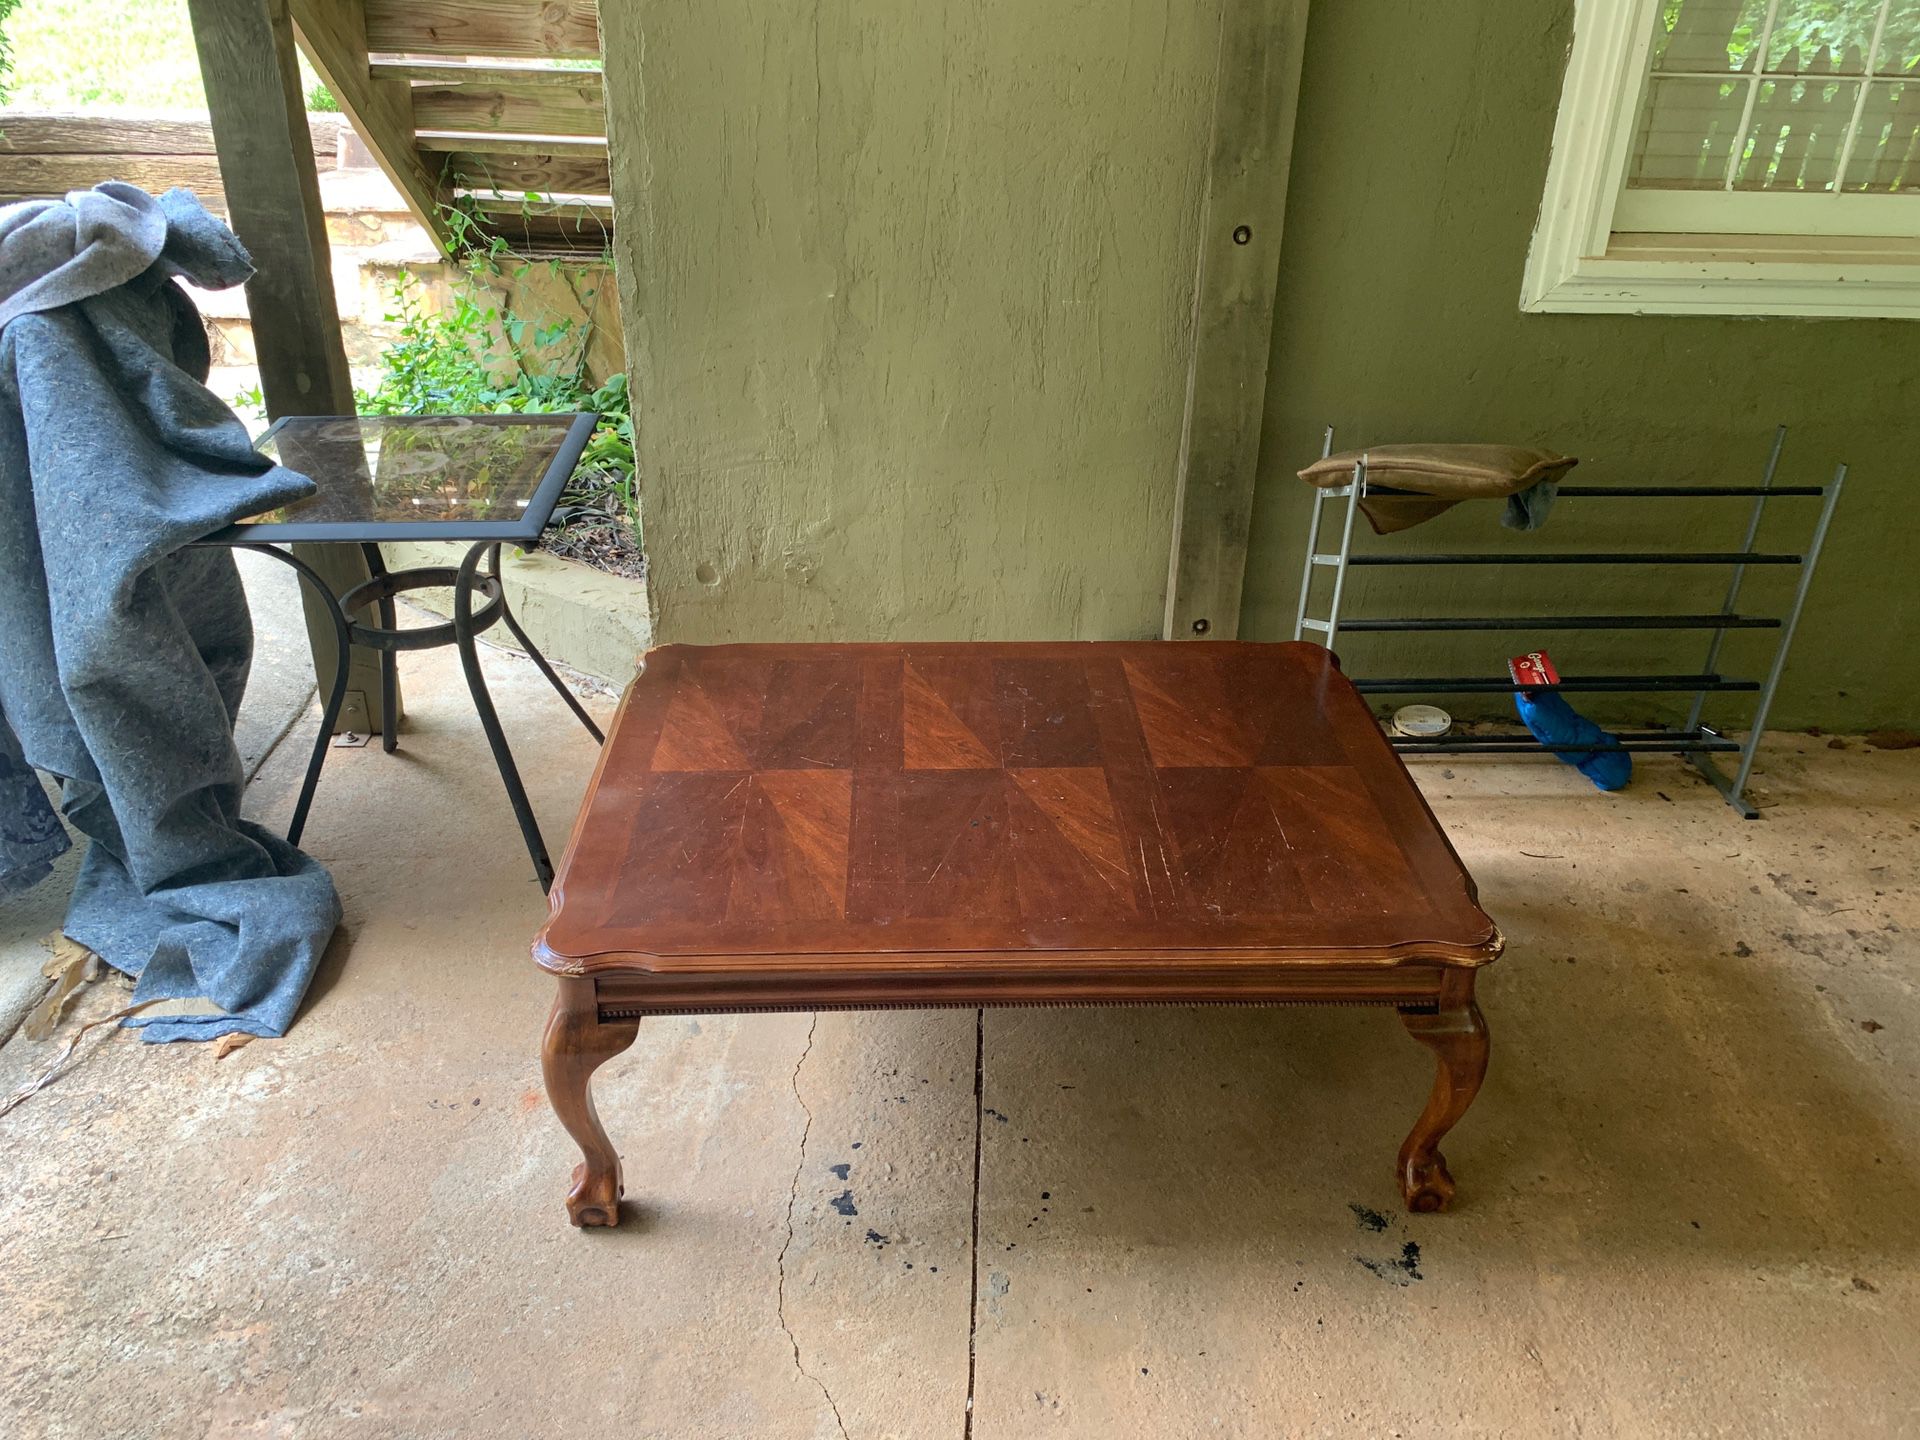 Coffee table, outside table, and shoe rack